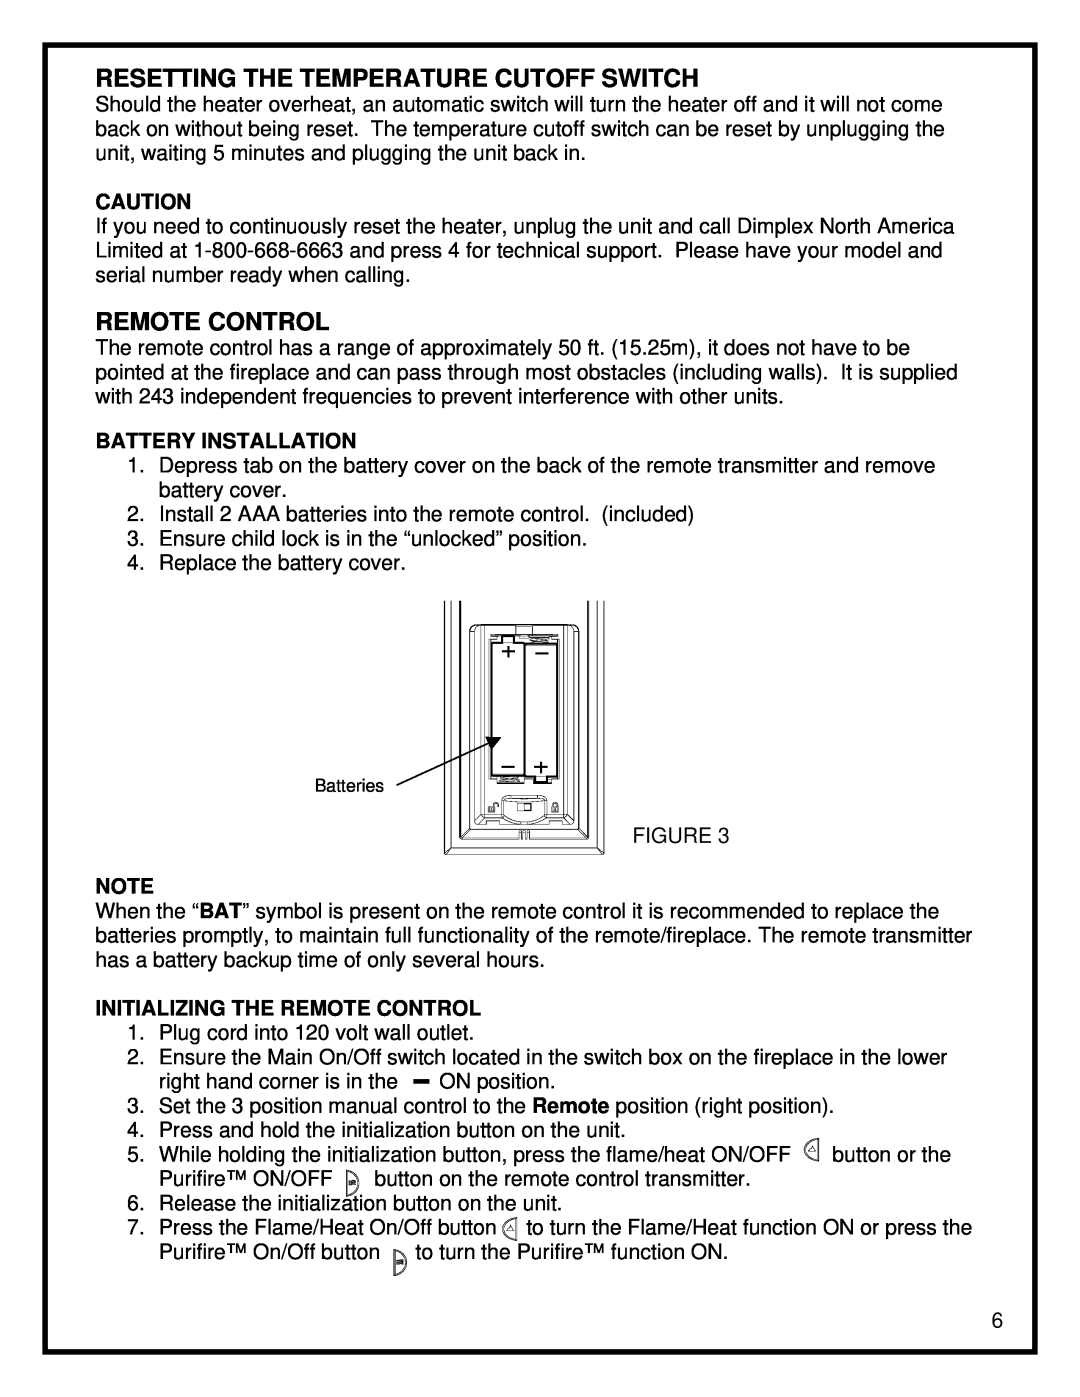 Dimplex DF3015 manual Resetting The Temperature Cutoff Switch, Remote Control, Battery Installation 